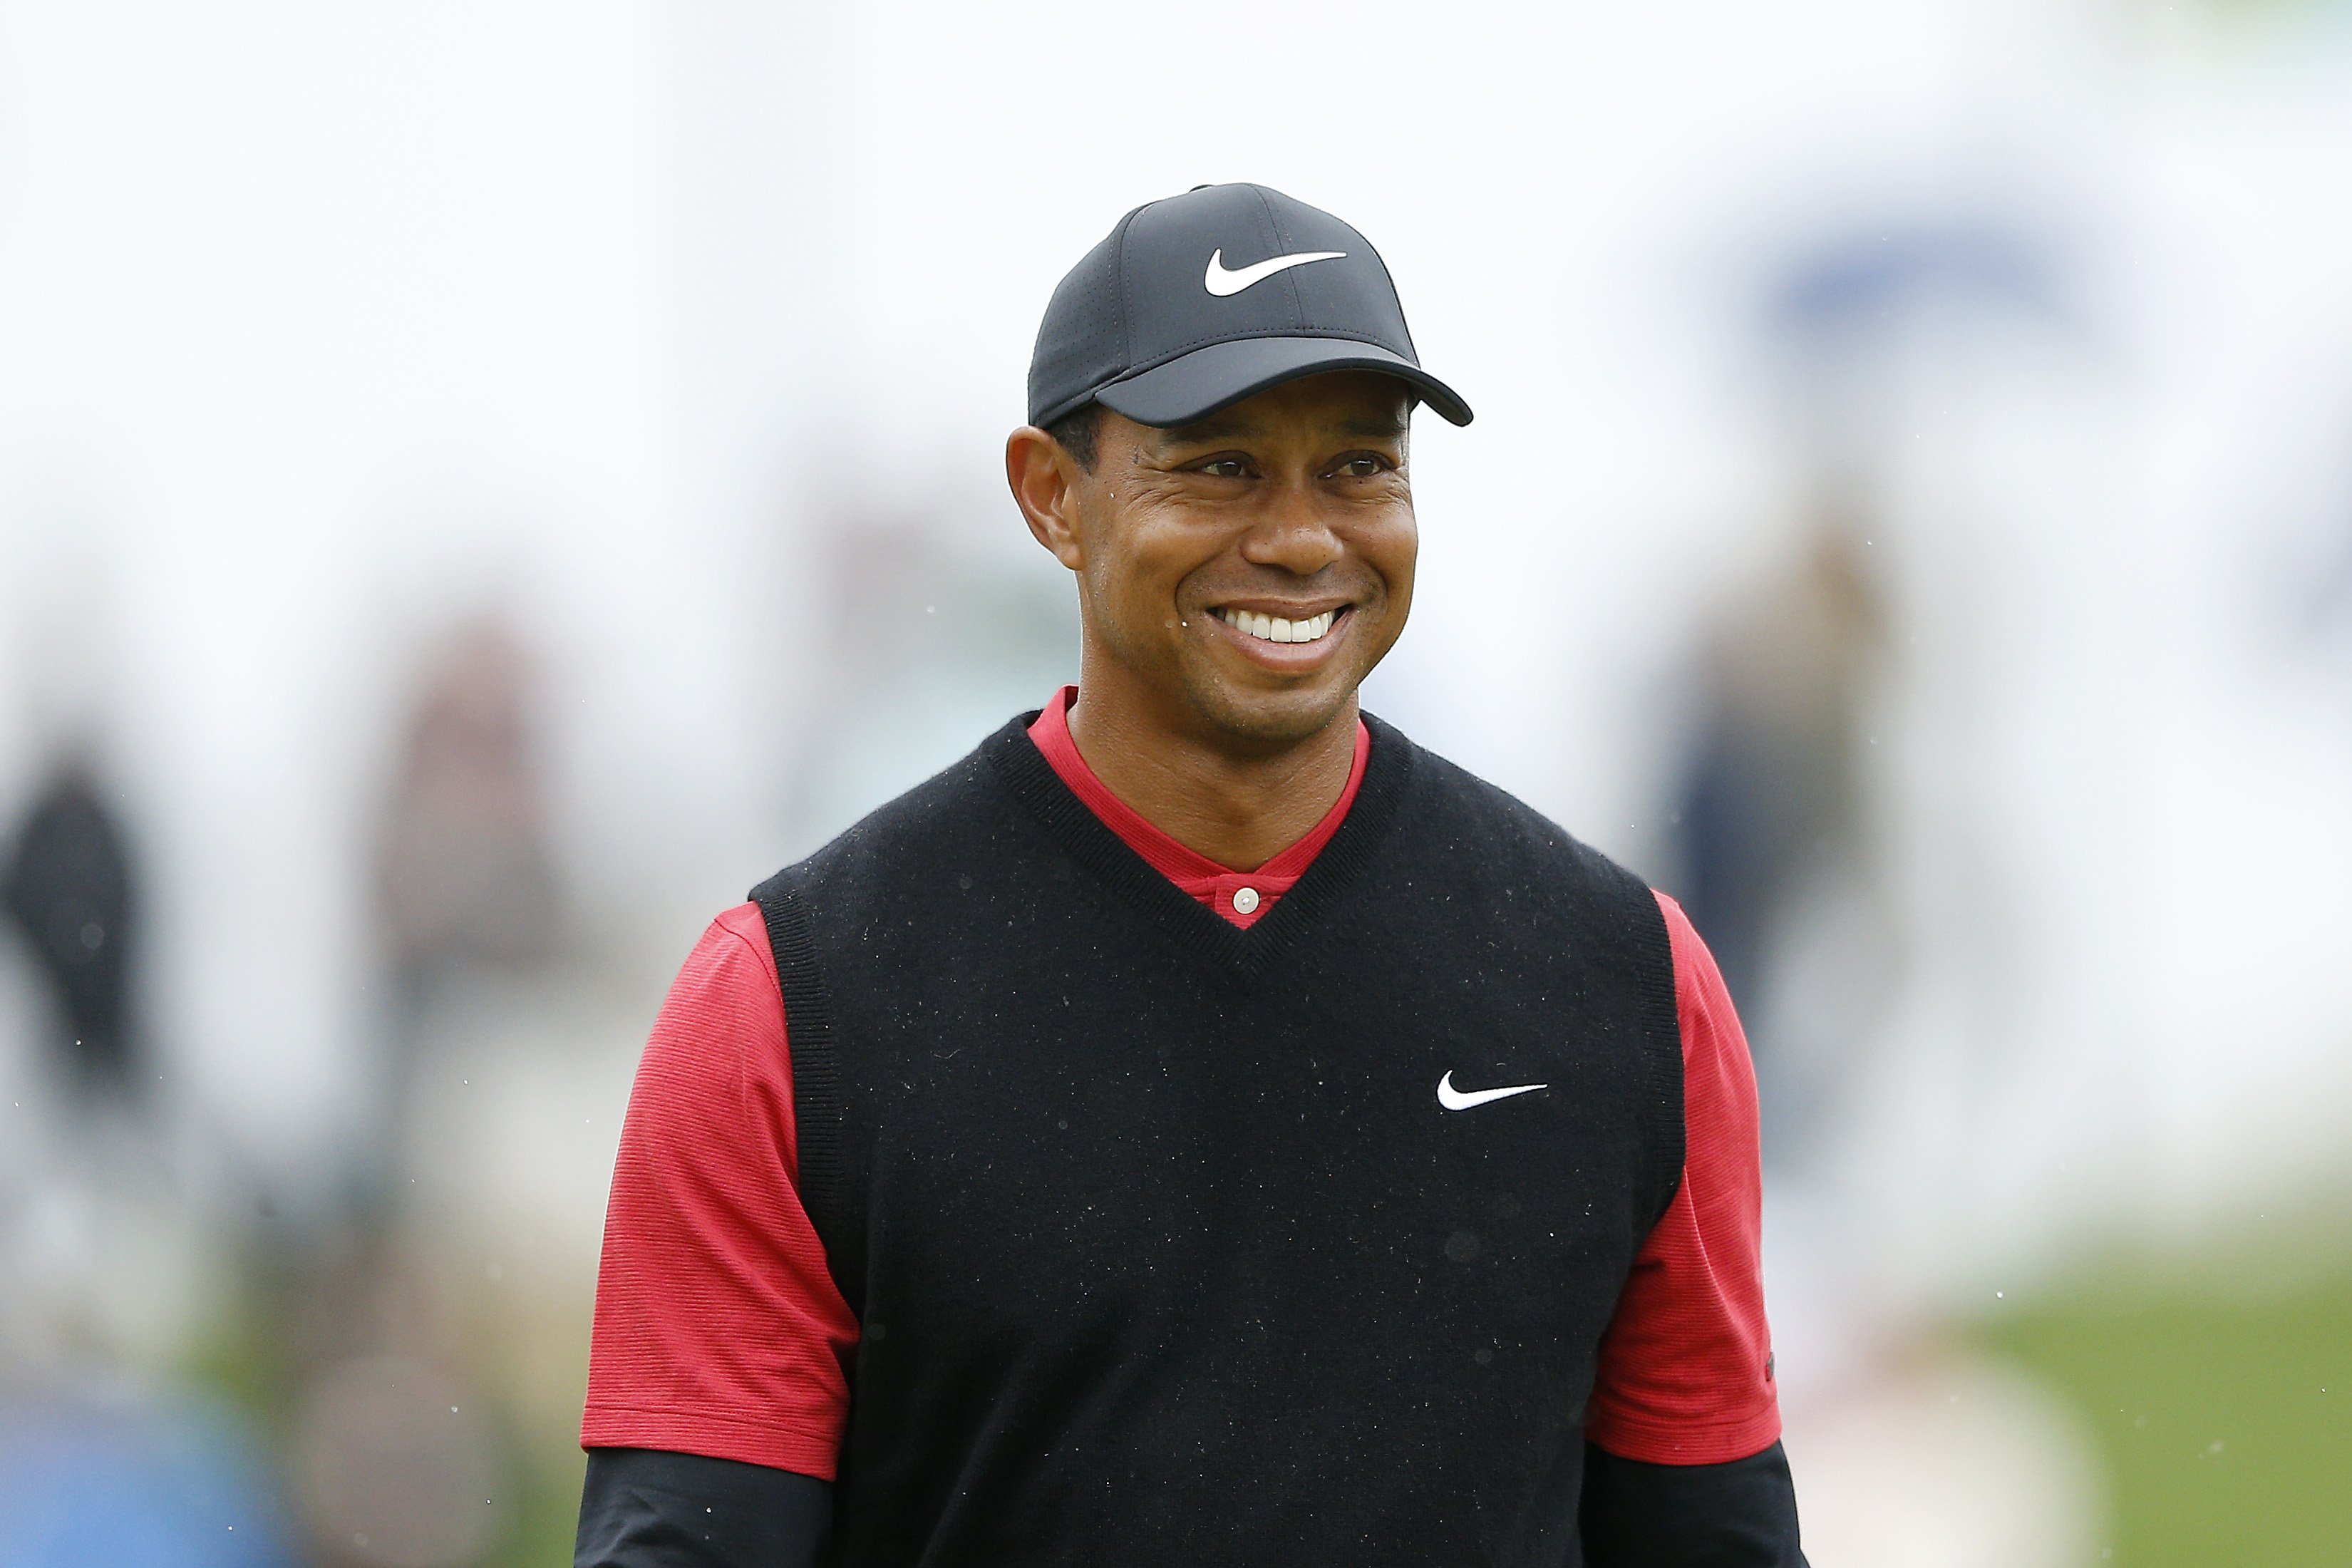 Tiger Woods at The PLAYERS Championship. March 17, 2019. | Photo: GettyImages